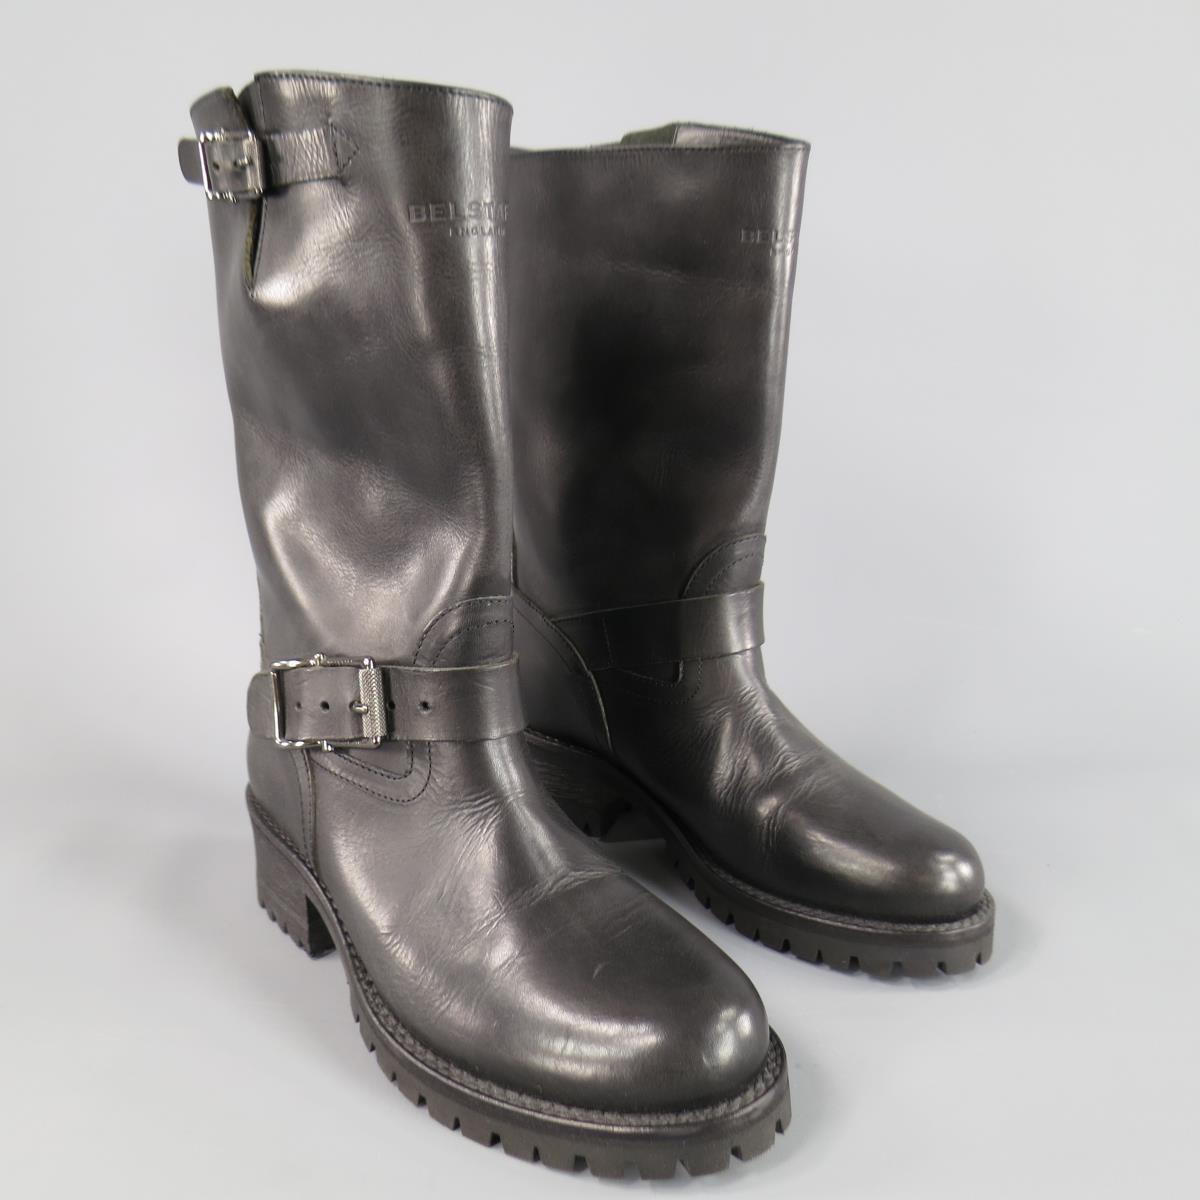 BELSTAFF Boots consists of leather material in a black color tone. Designed with a round-toe front, high neck collar, adjustable side belts with silver buckle's and tone-on-tone stitching throughout back heel. Detailed with top embossed logo, back